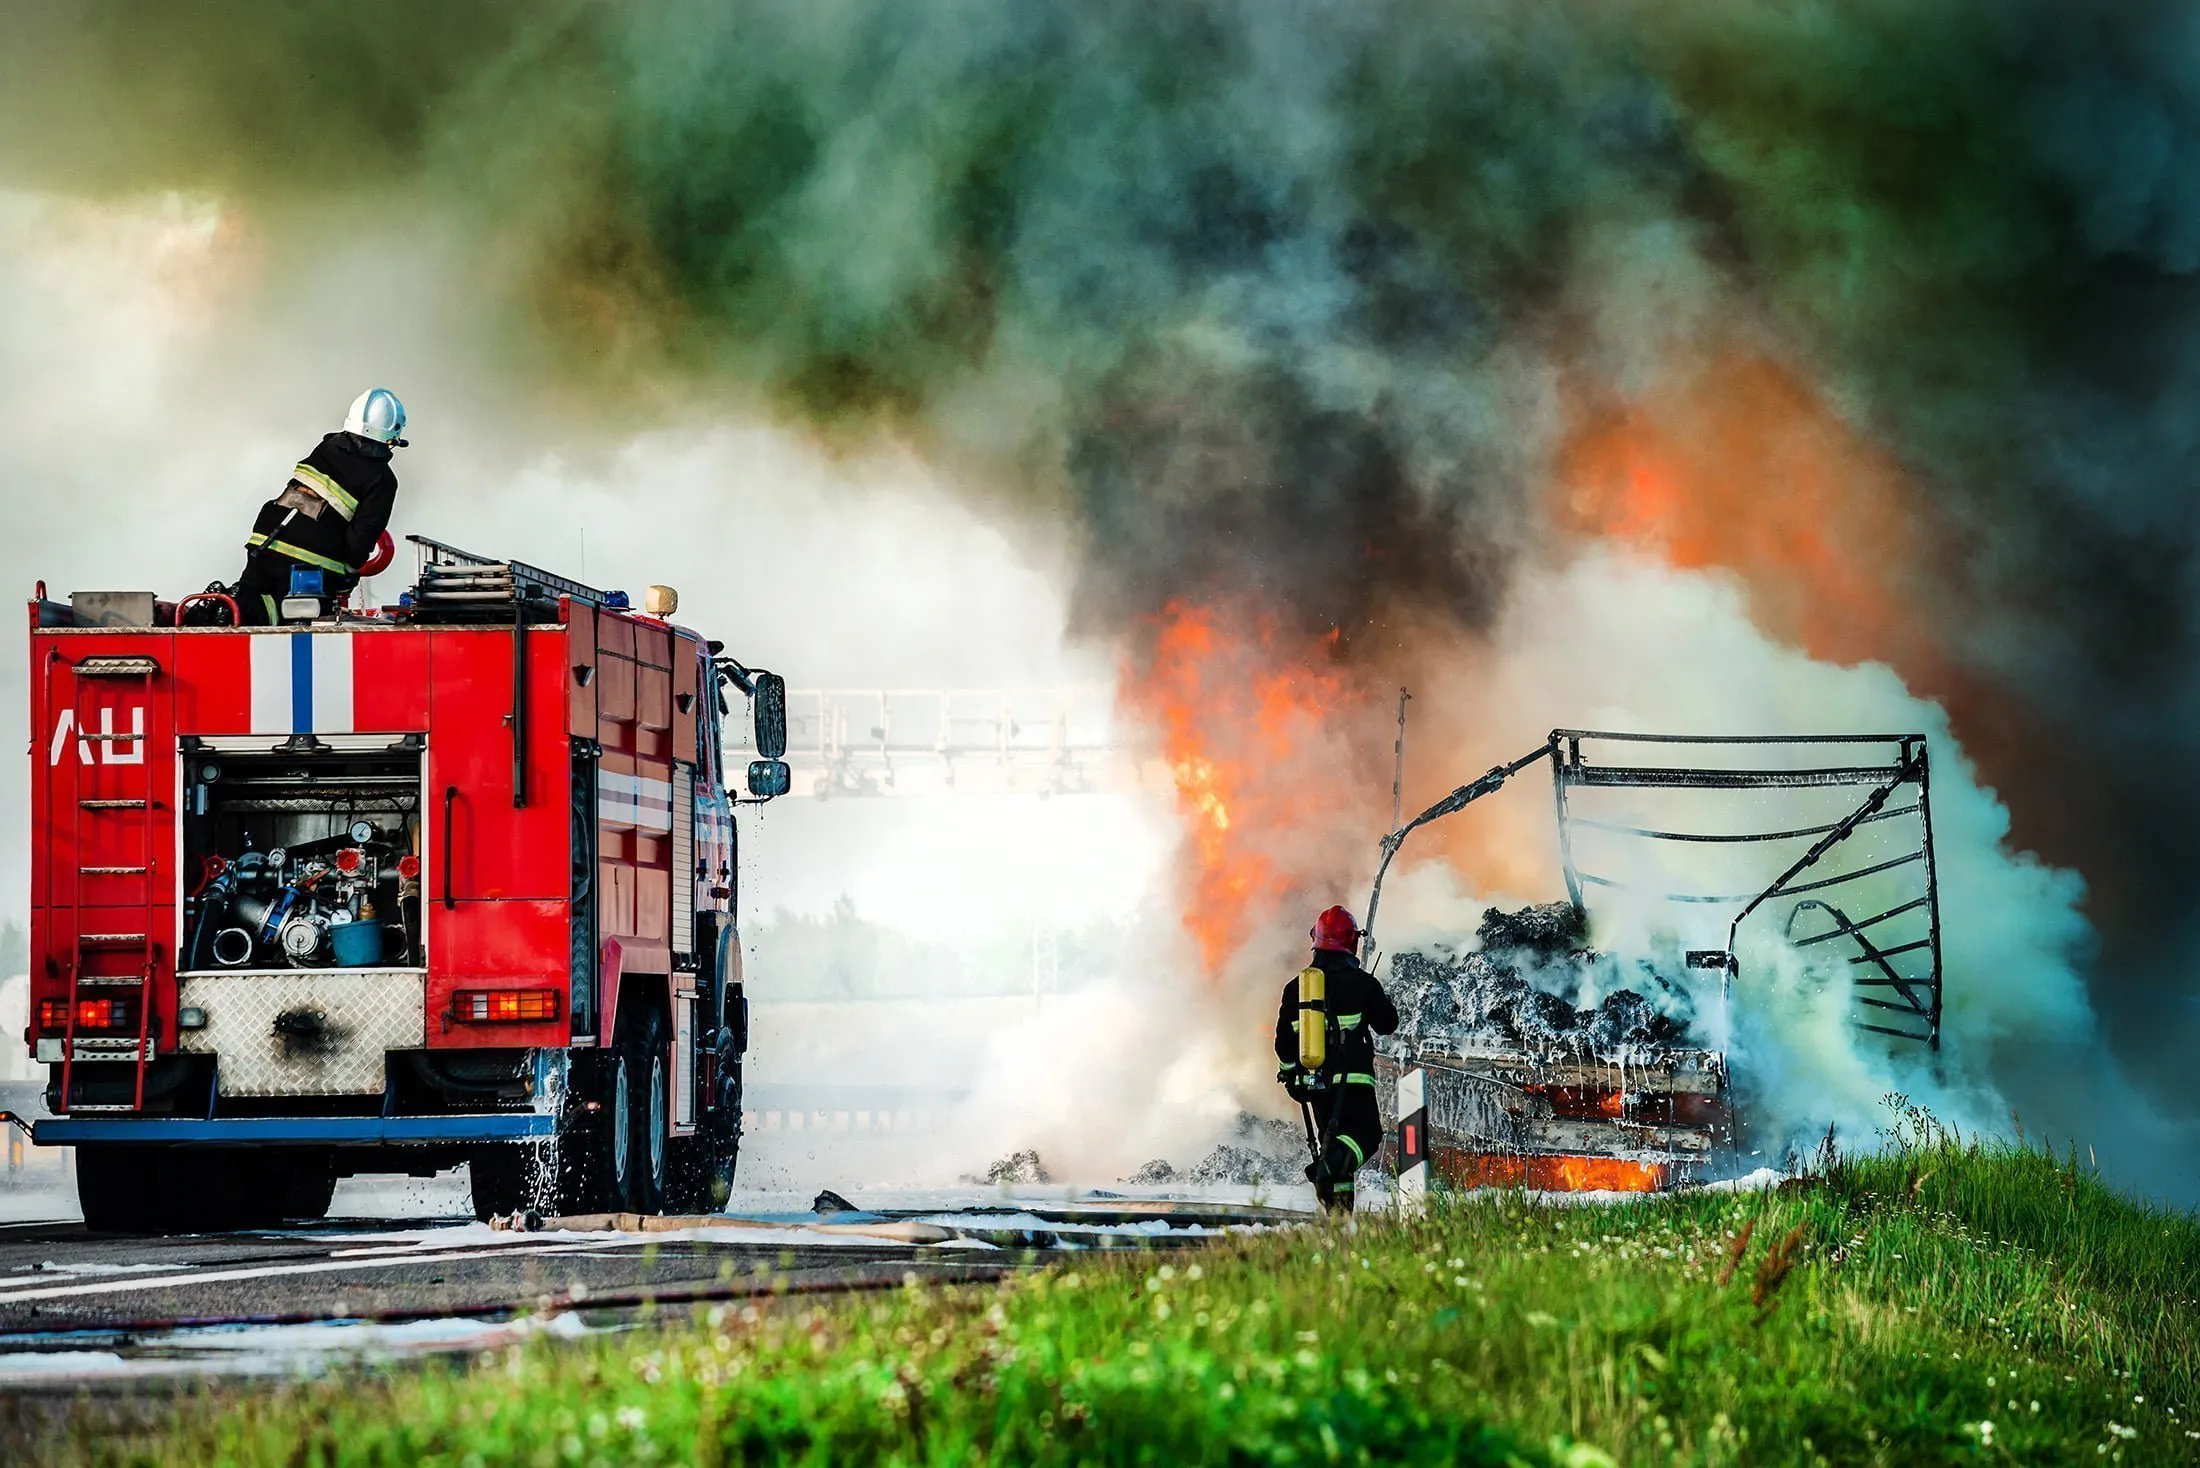 Firetruck and firemen putting out semi-truck on fire. If you’ve been injured by a commercial vehicle in Wyoming, our truck accident lawyers are ready to fight for you.